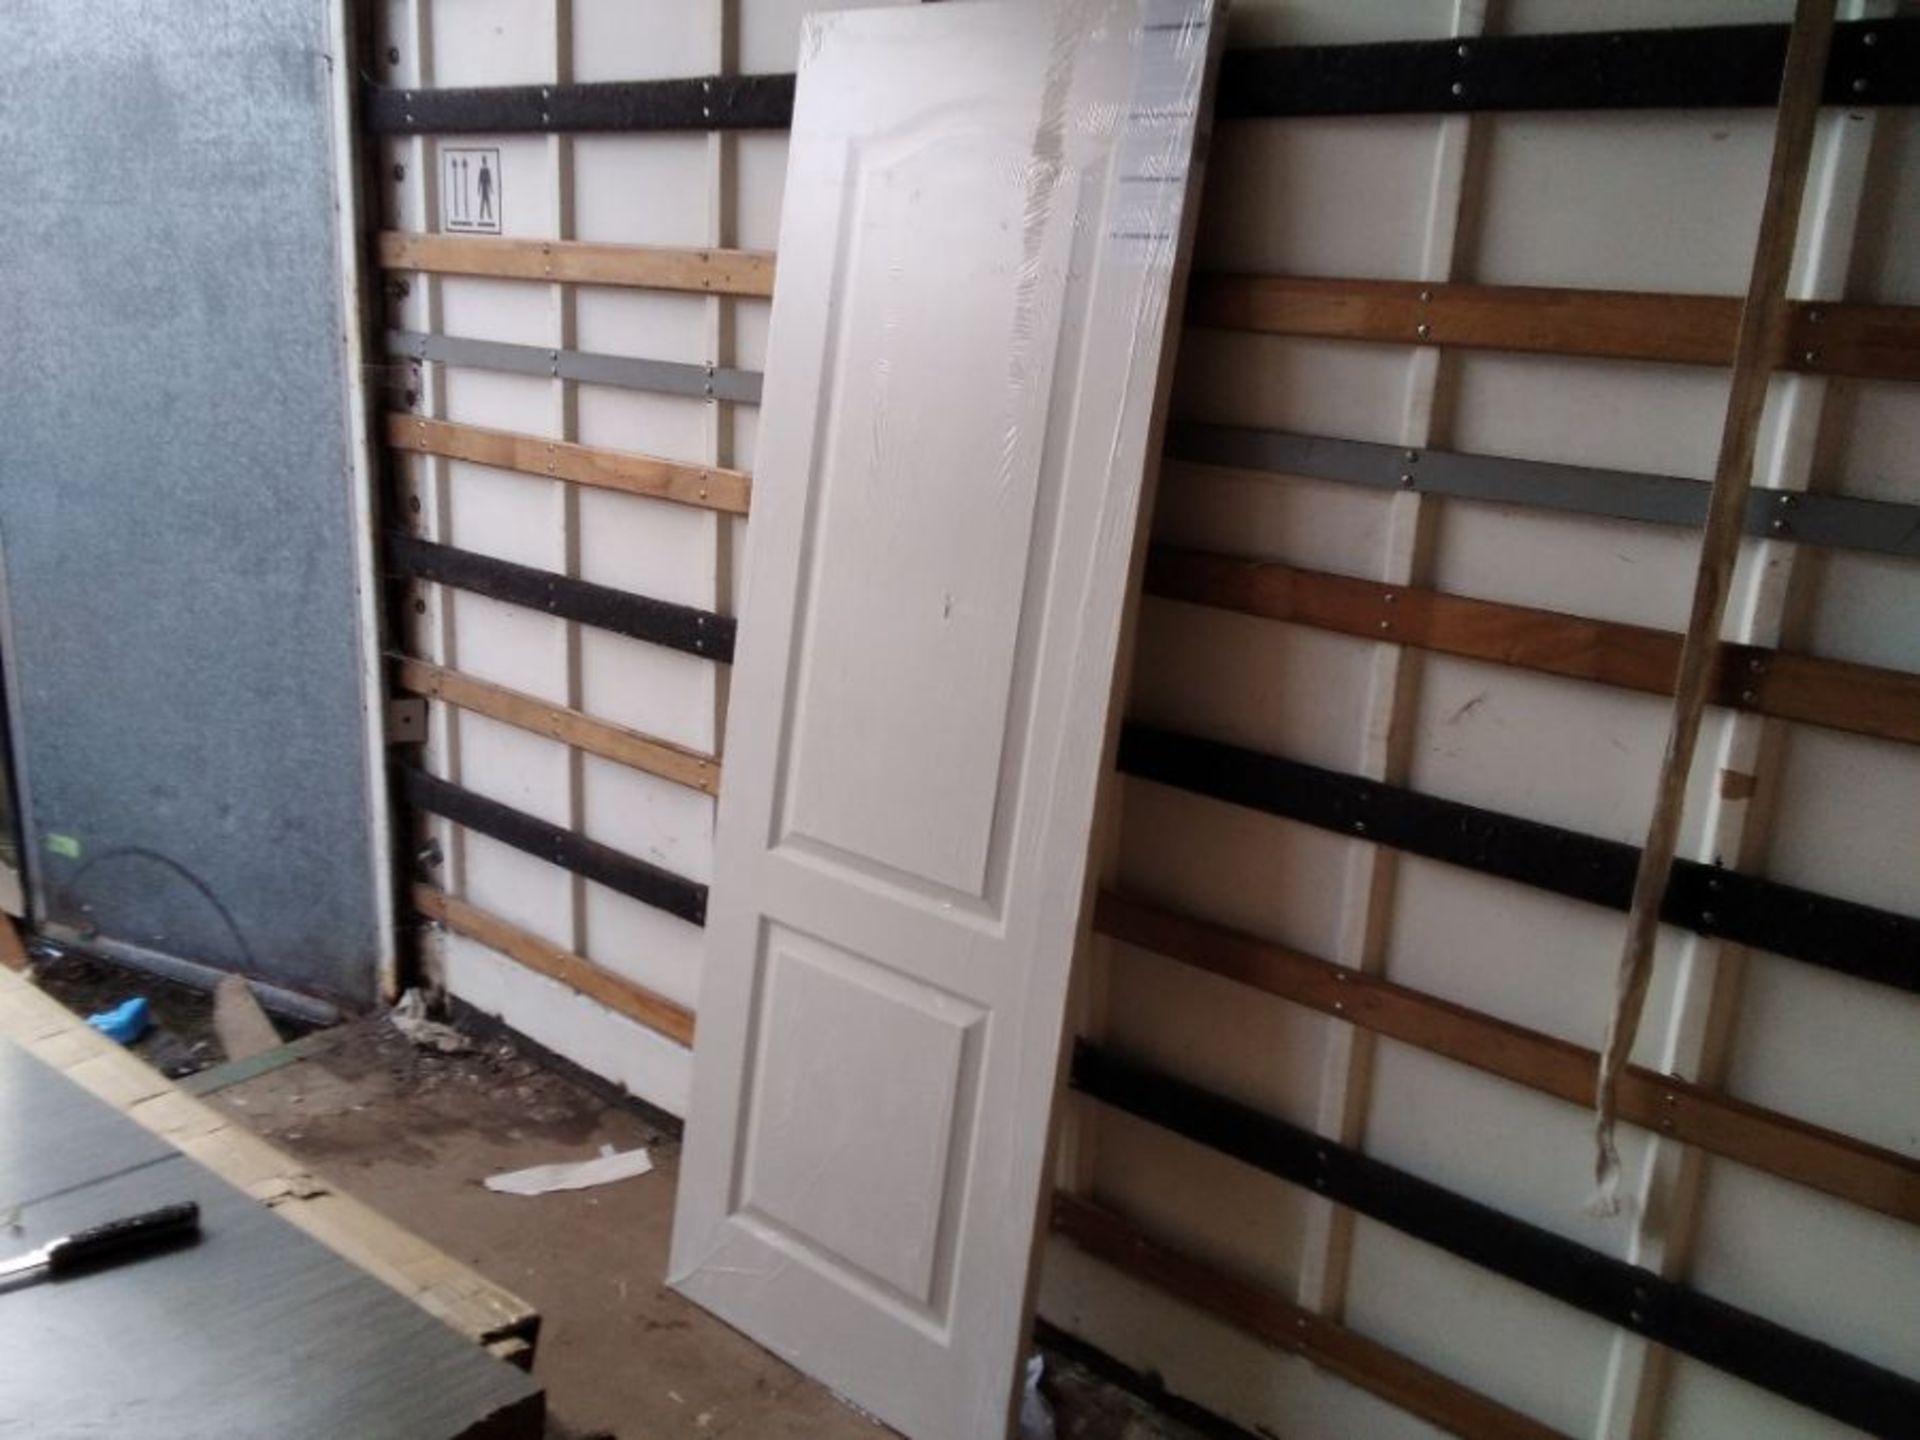 XL Joinery Limited,Classique Internal Door Unfinished (DAMAGED) (69cm W x 198cm H) RRP -£71.99(